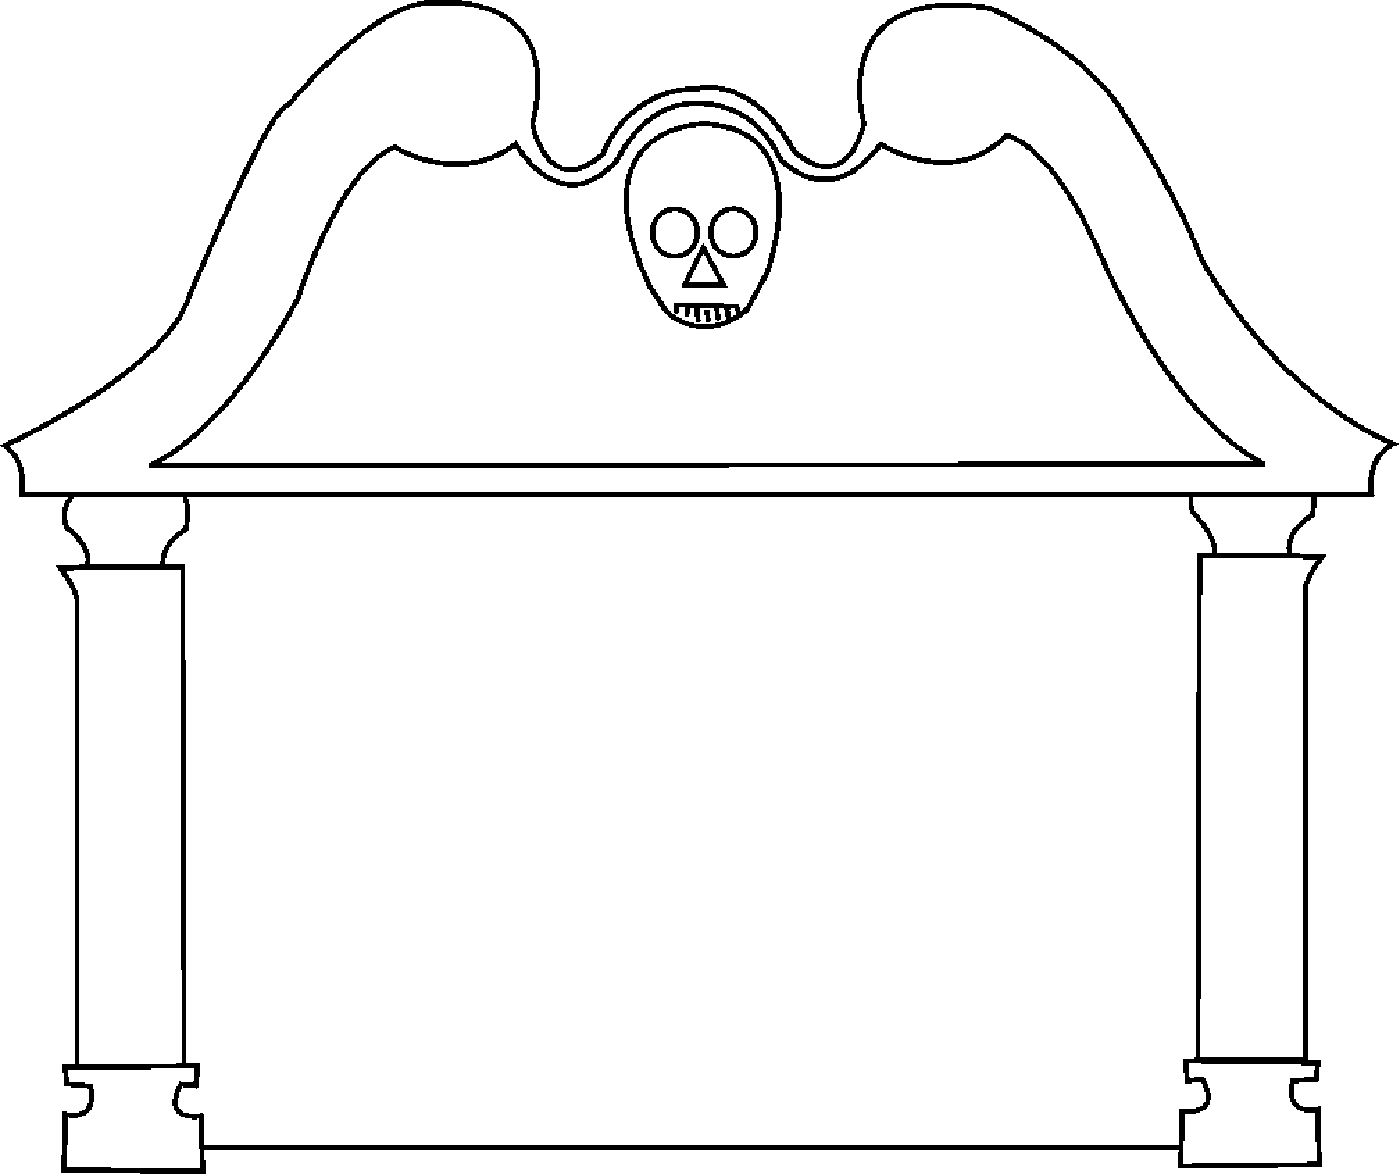 Free Tombstone Coloring Page, Download Free Tombstone Coloring Page png